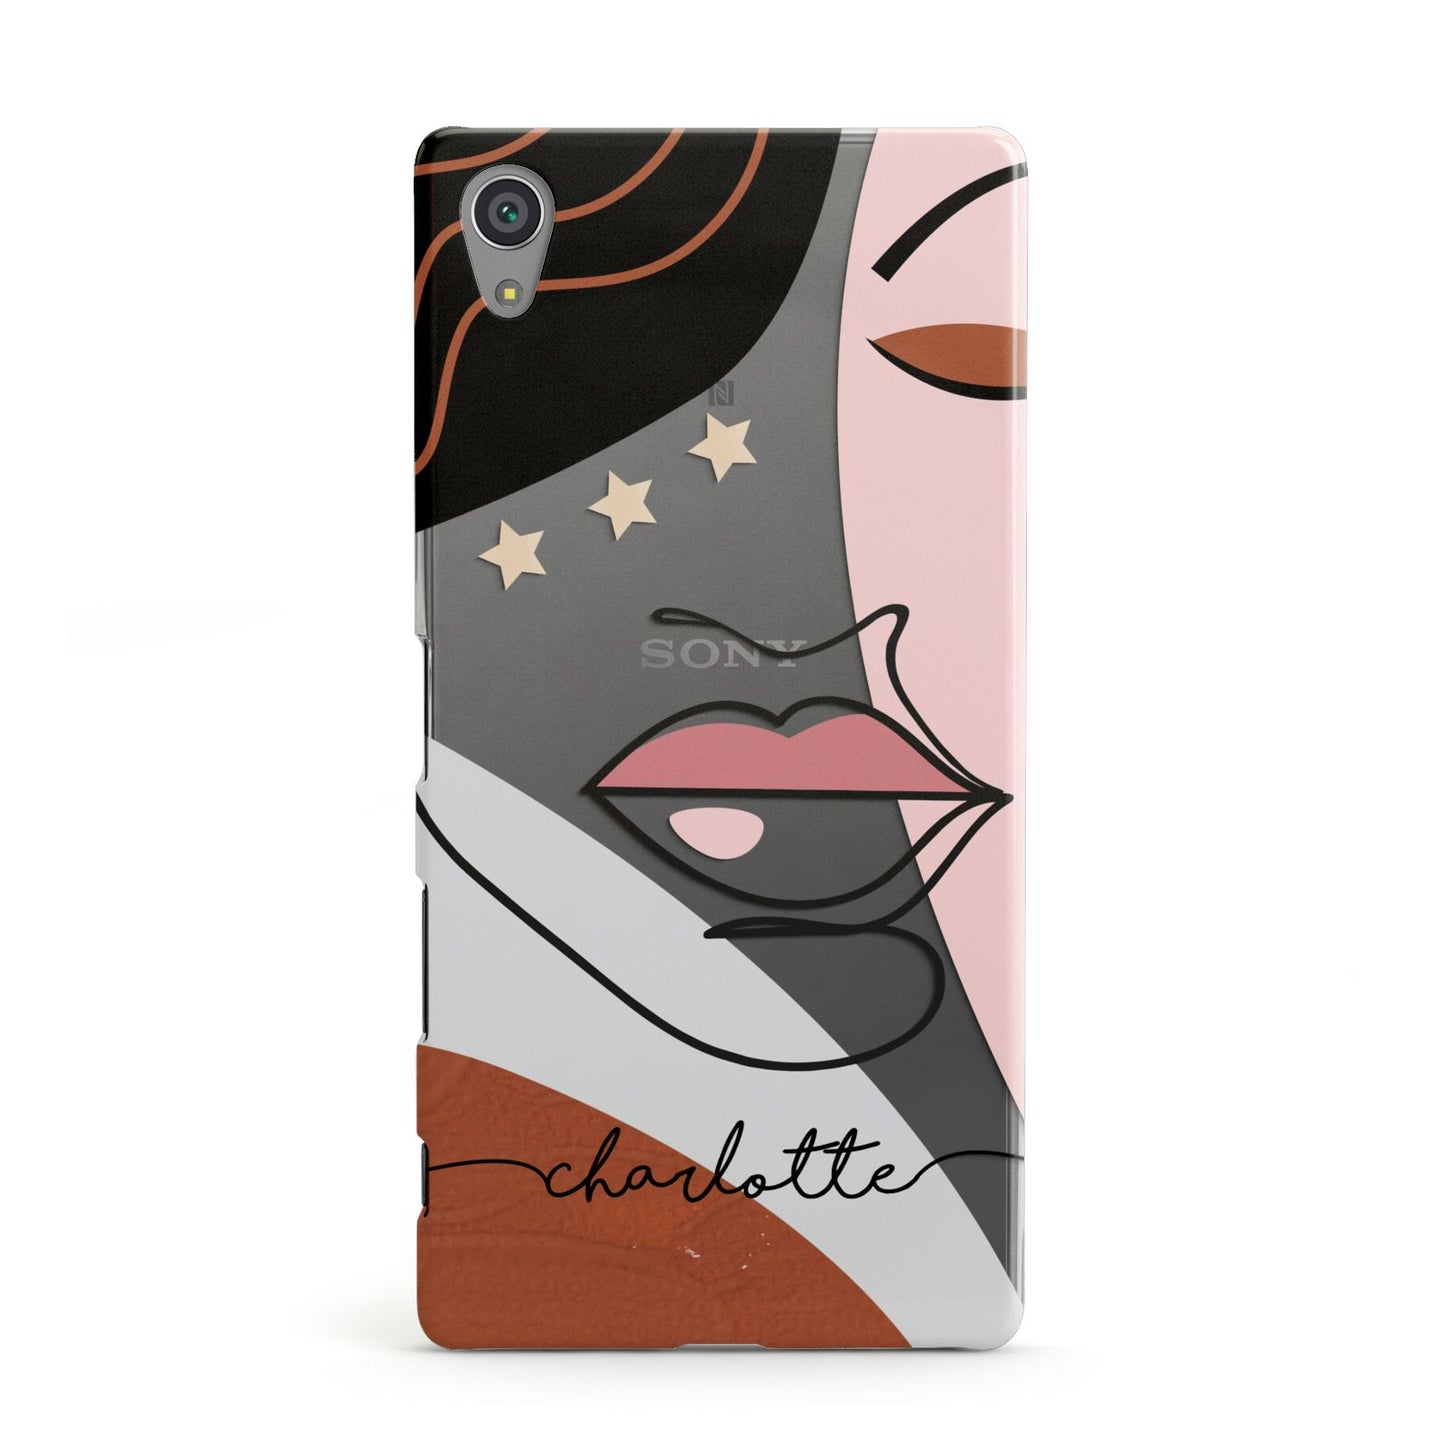 Personalised Abstract Art Sony Xperia Case